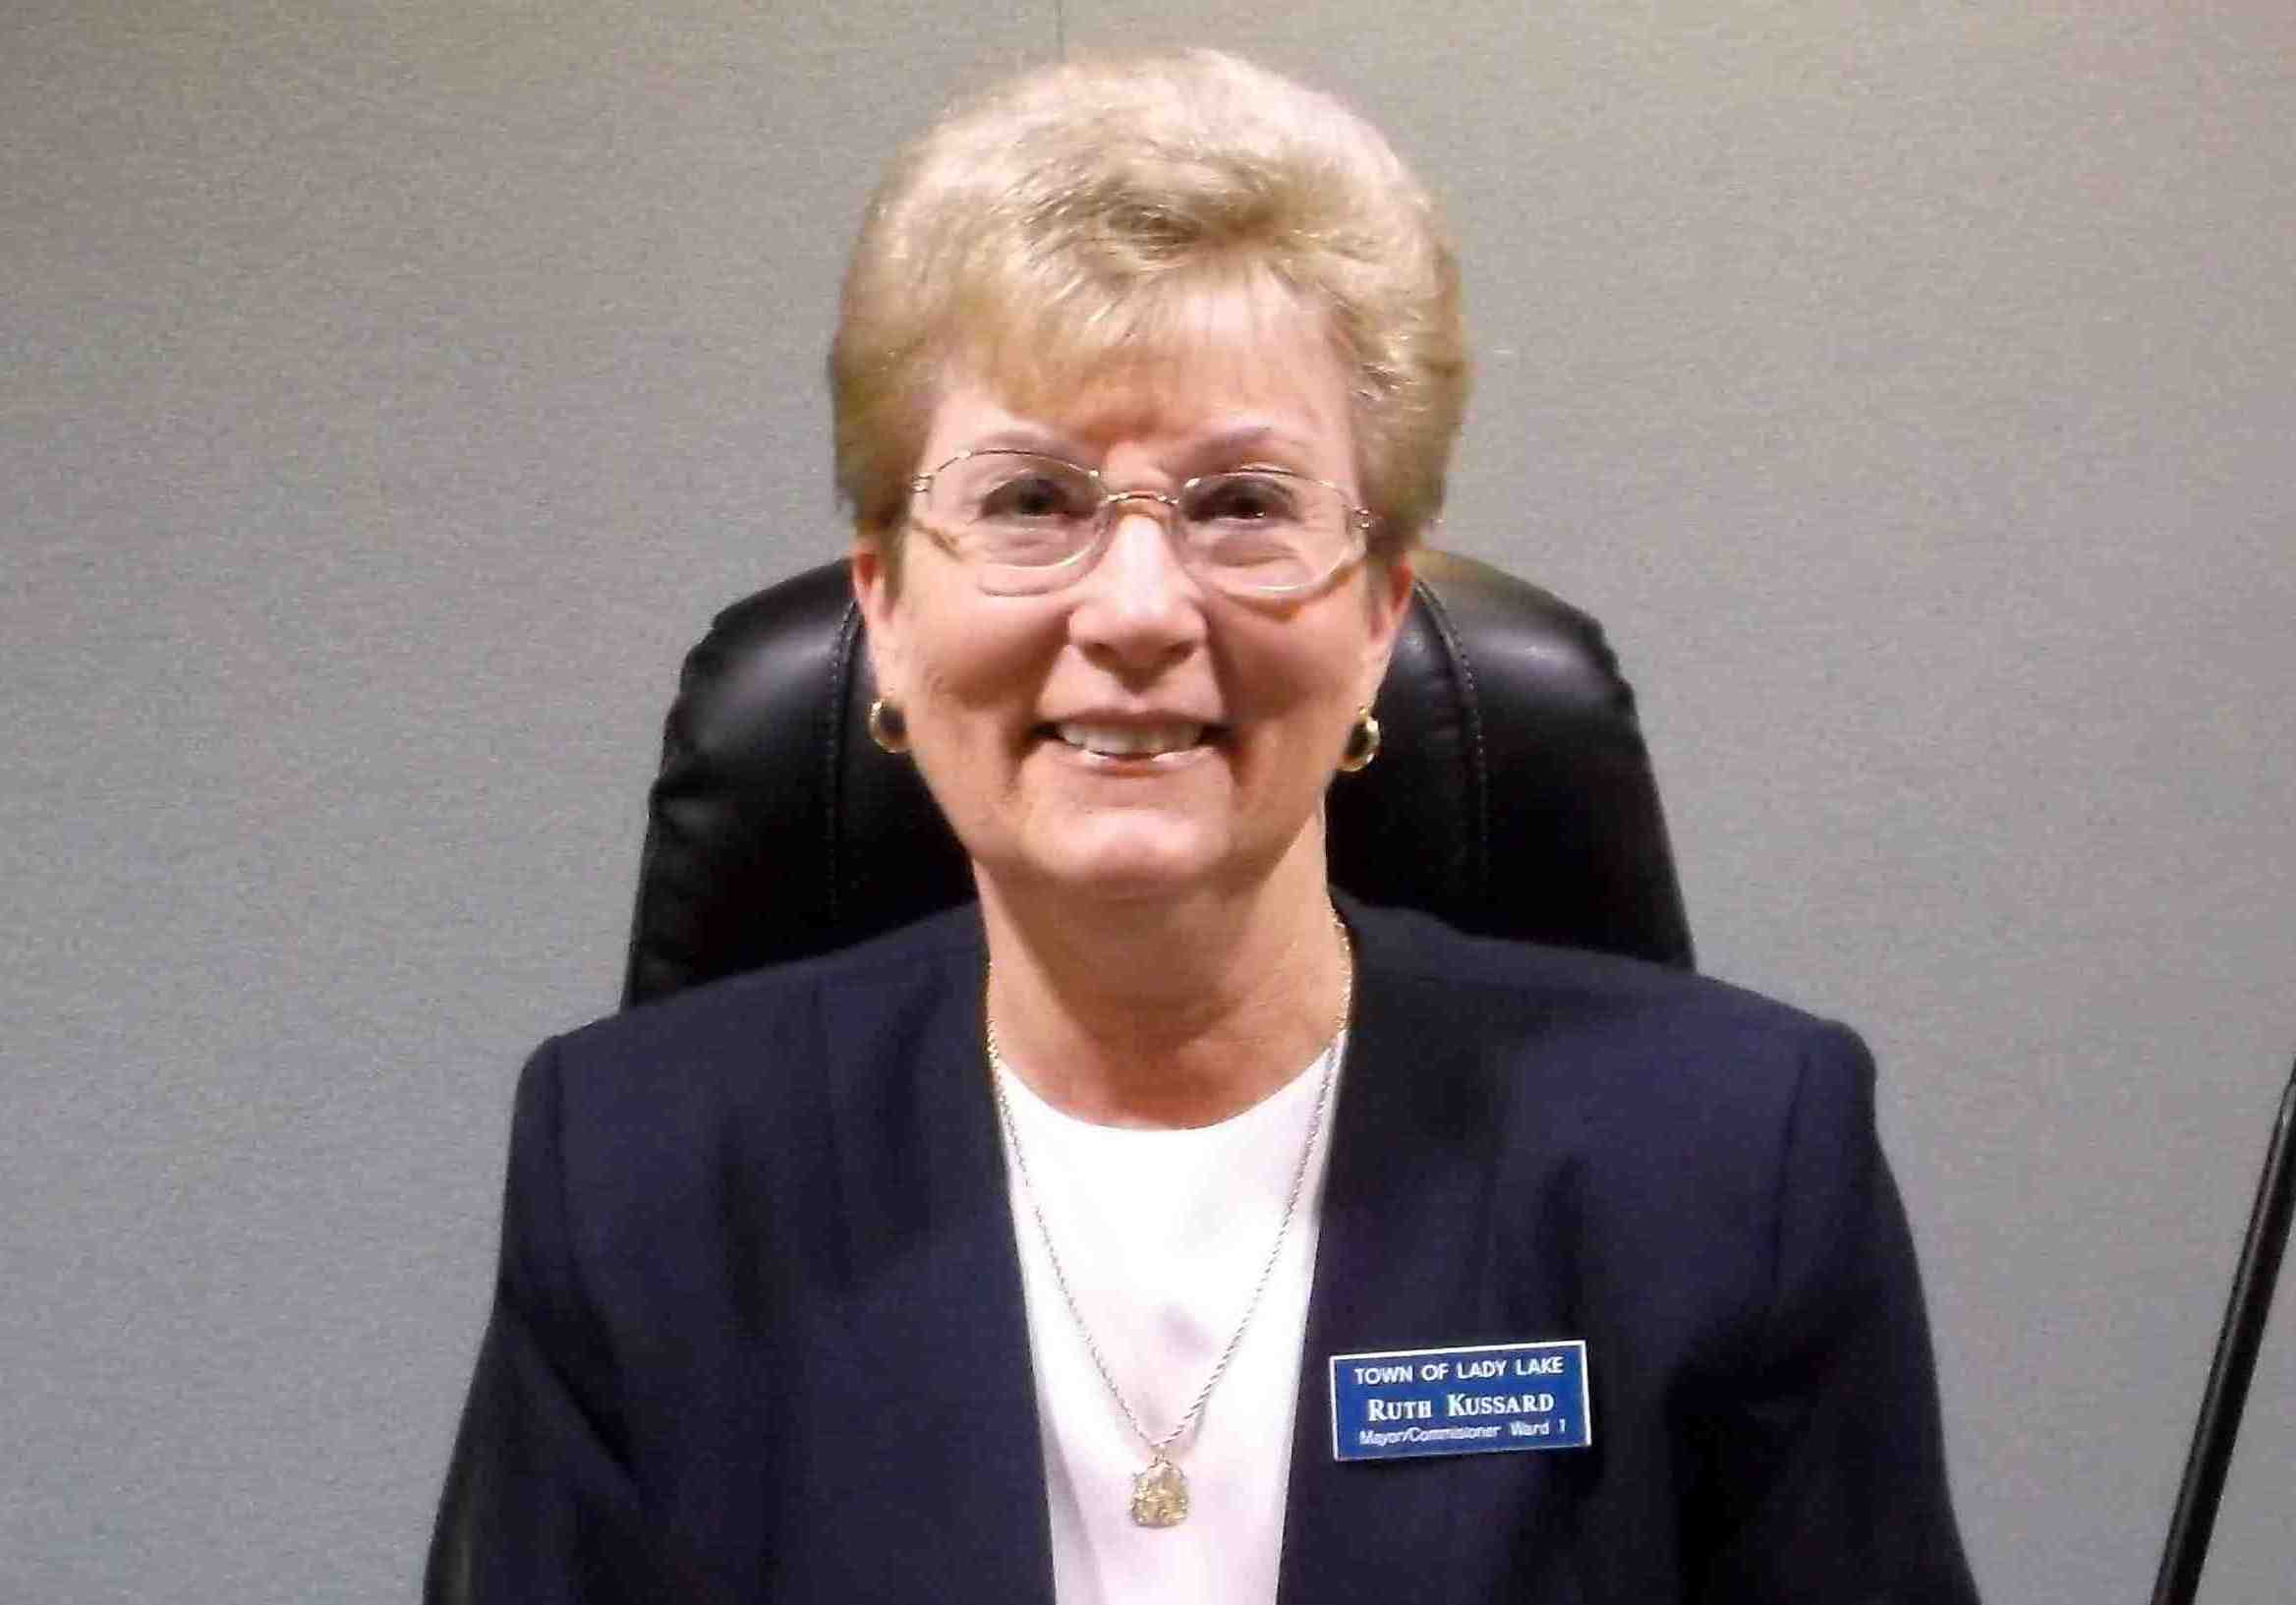 Mayor Ruth Kussard chosen for third term at helm of town of Lady Lake